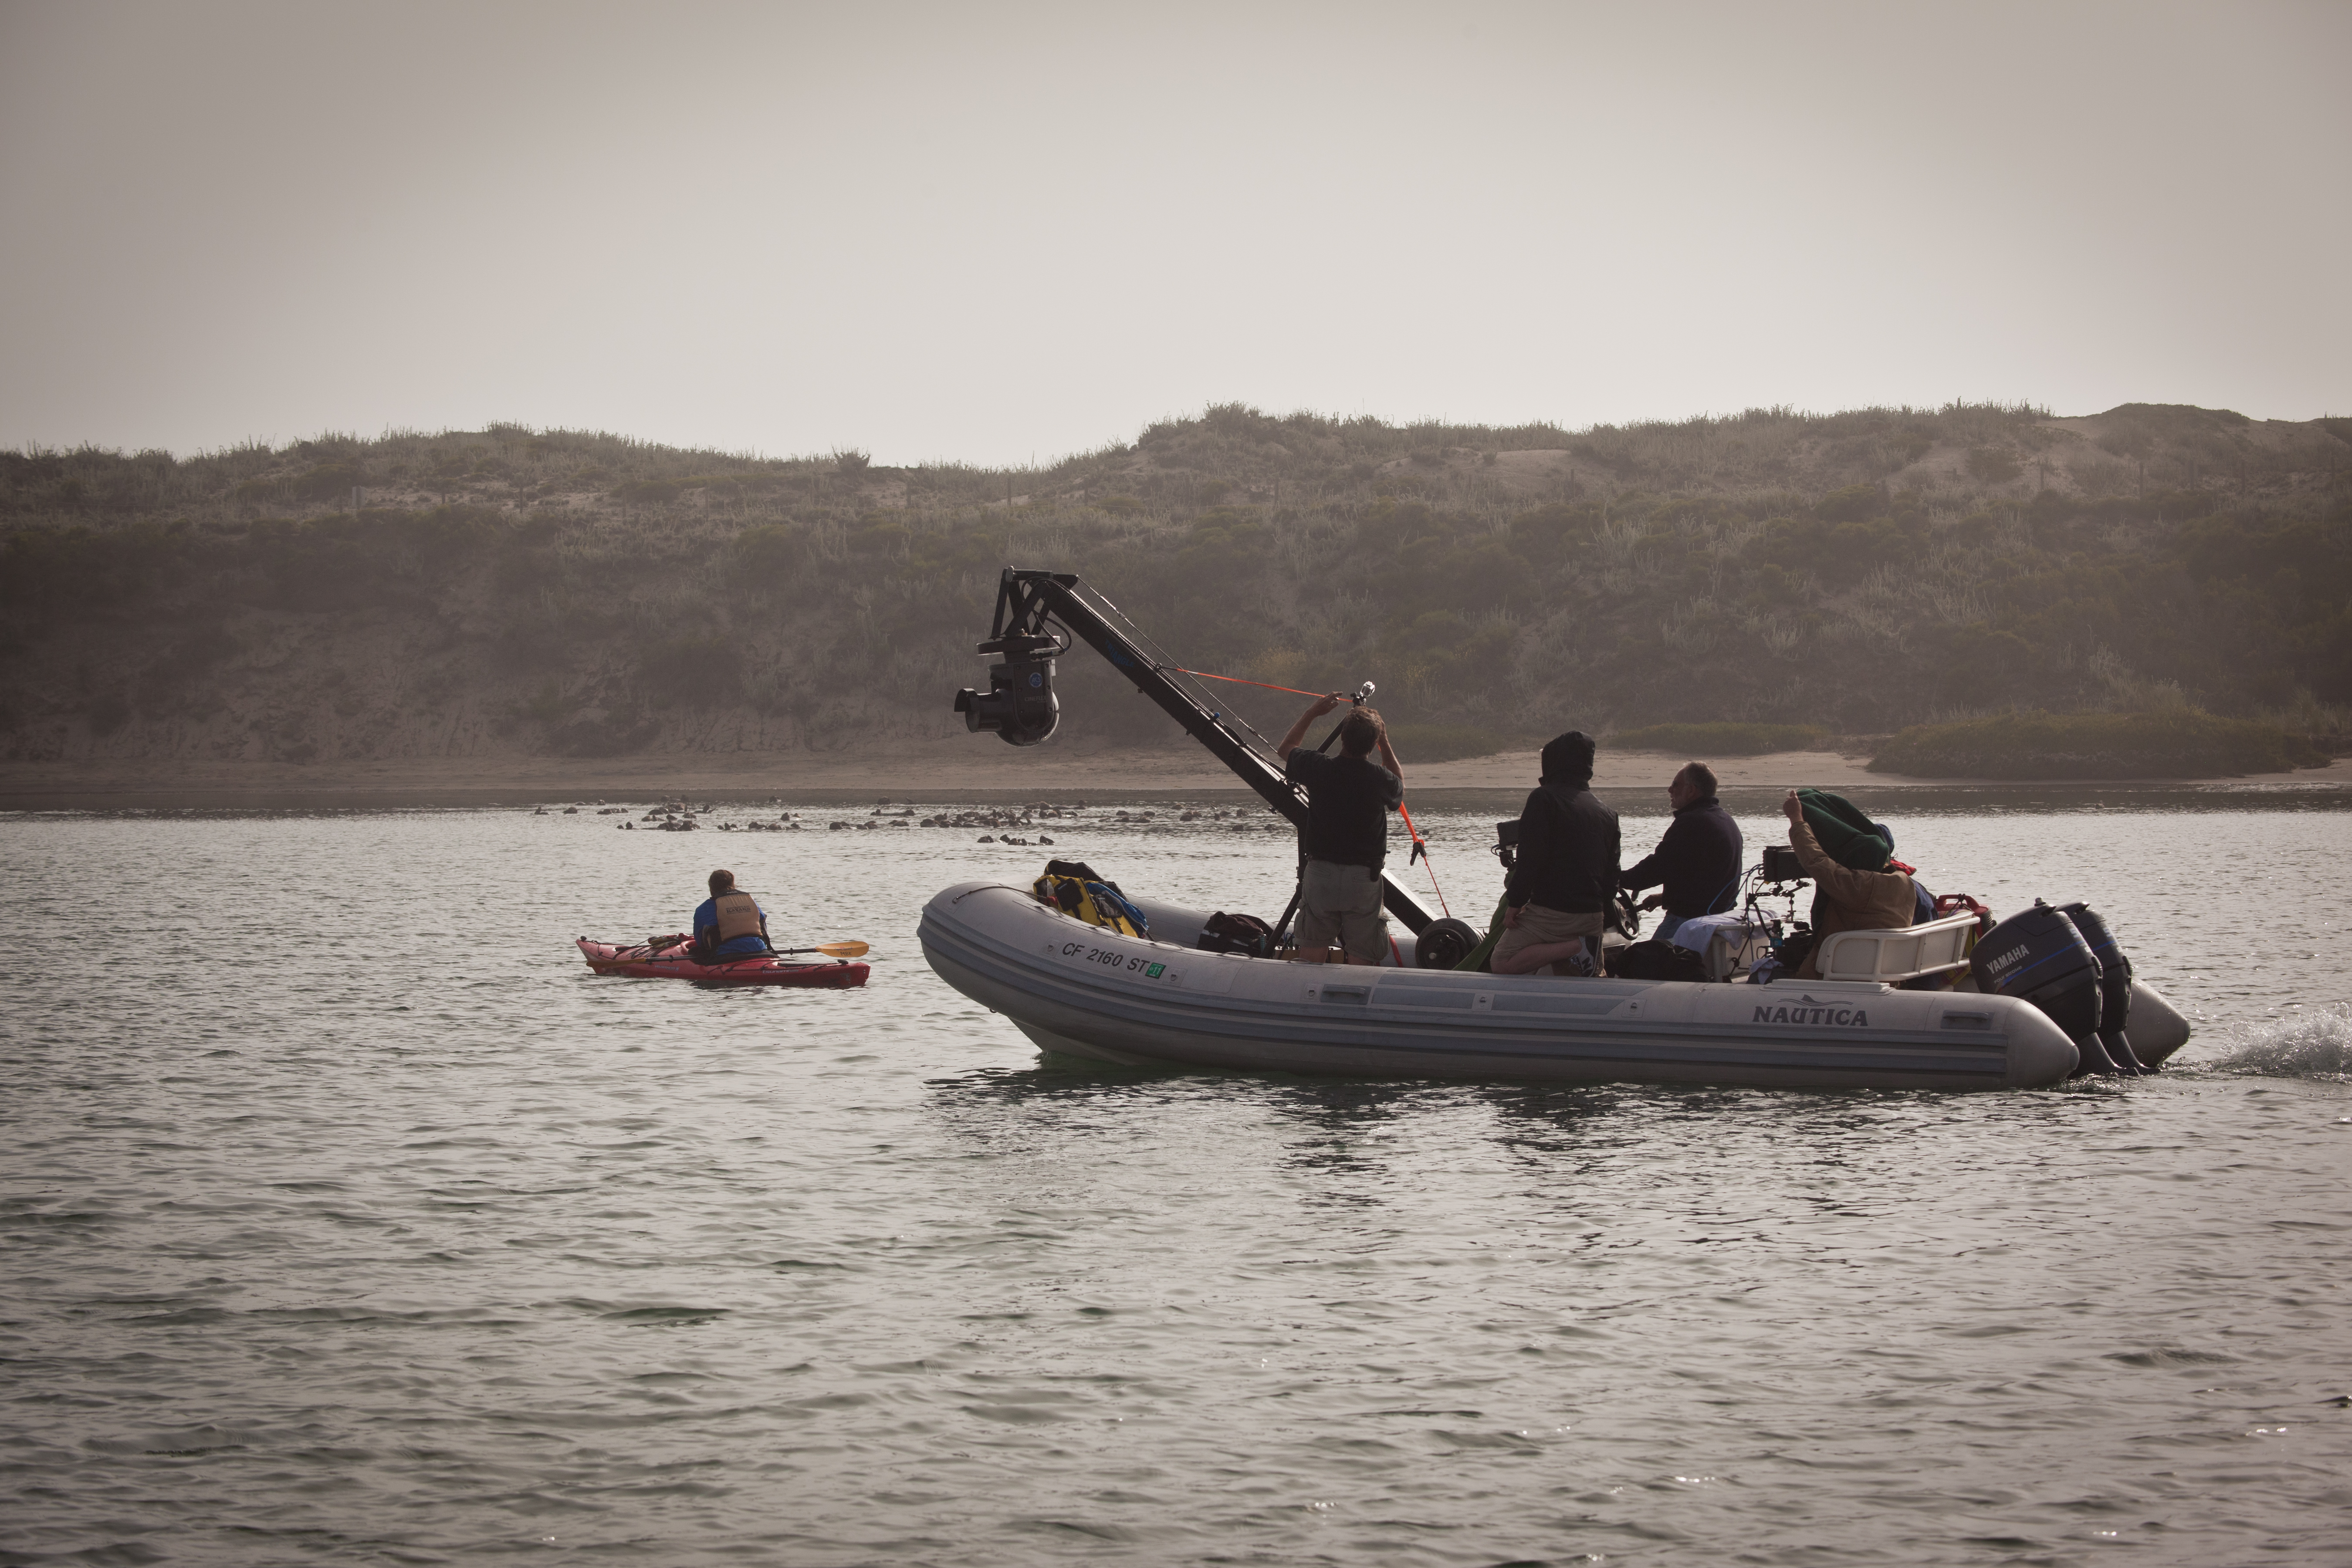 The crew of Otter 501 (Chris Siracuse, Mark Shelley, Bob Talbot, Tom Miller, Phillip Powell, and Katie Pofahl) filming in Elkhorn Slough, CA.